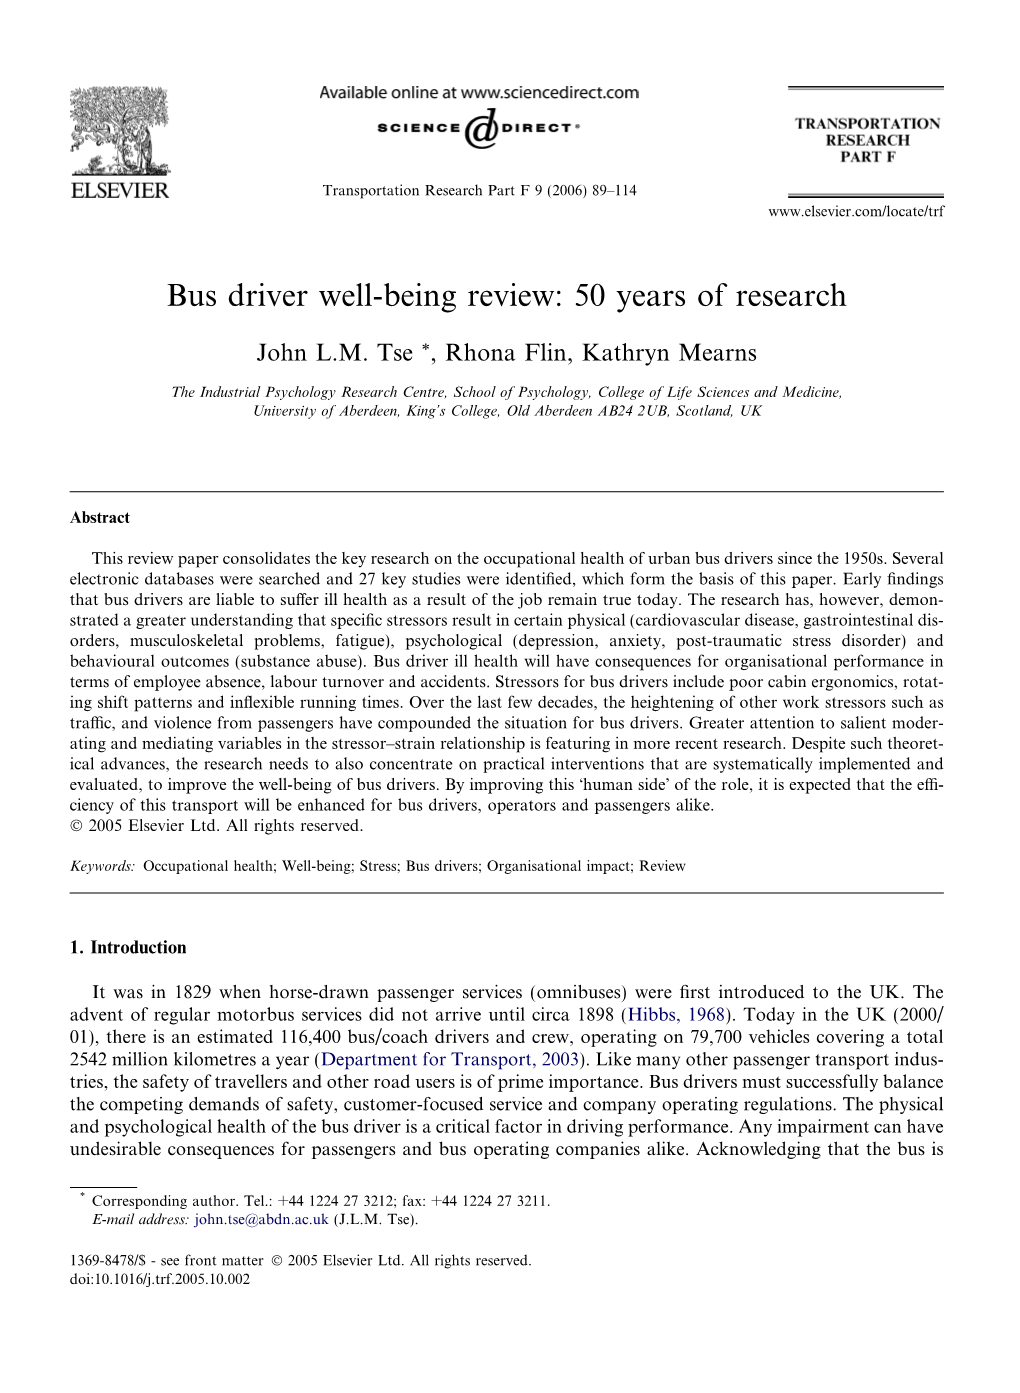 Bus Driver Well-Being Review: 50 Years of Research